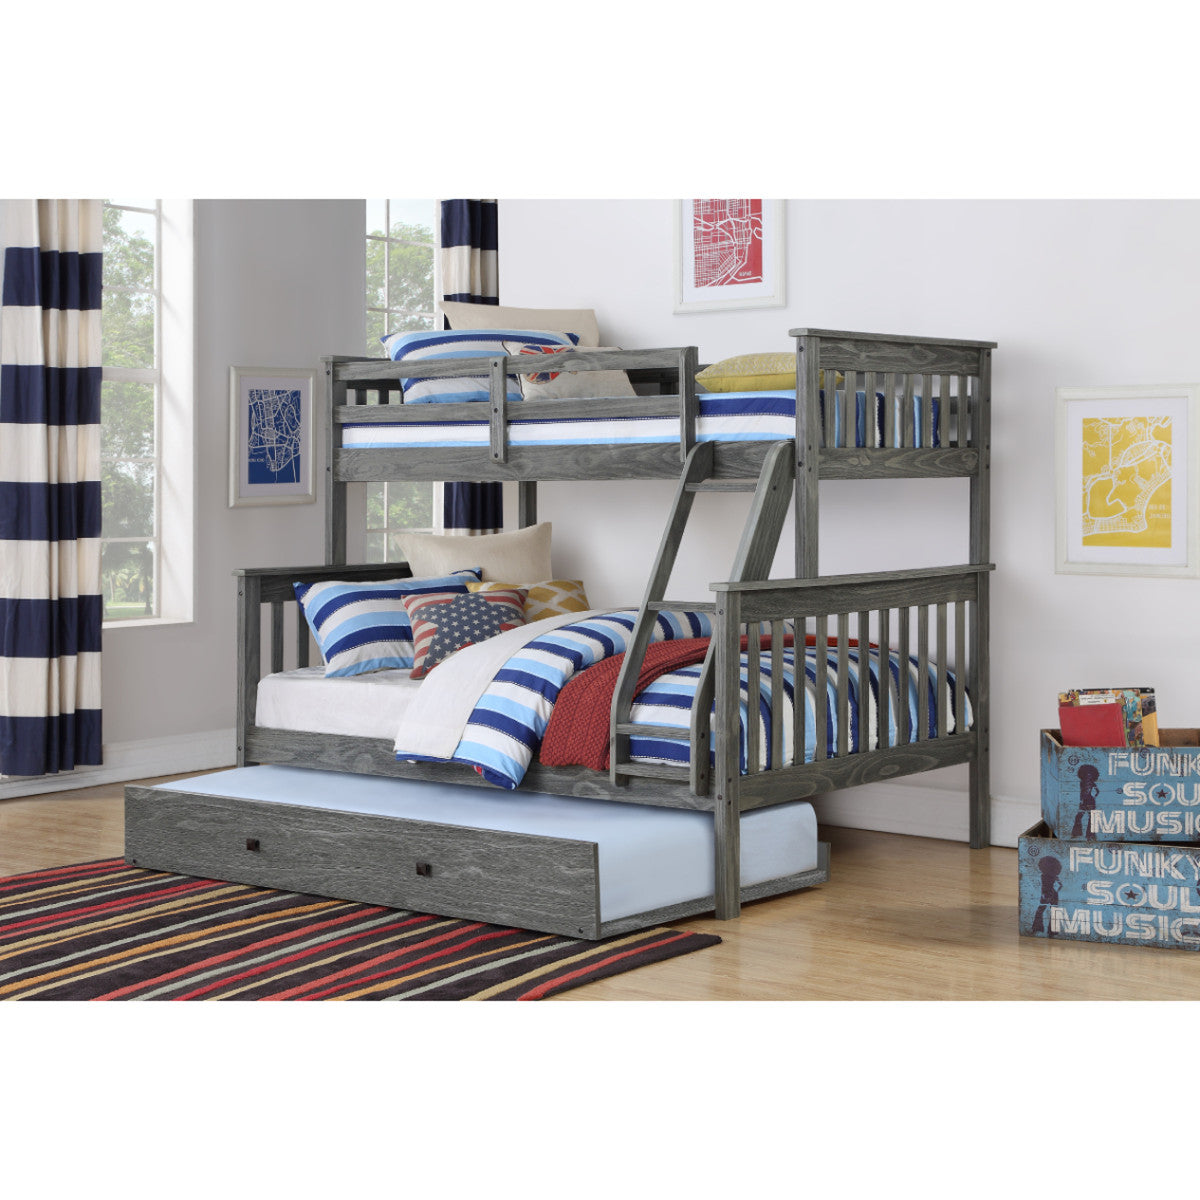 TWIN/FULL MISSION BUNK BED WITH TRUNDLE BED IN BRUSHED GREY FINISH